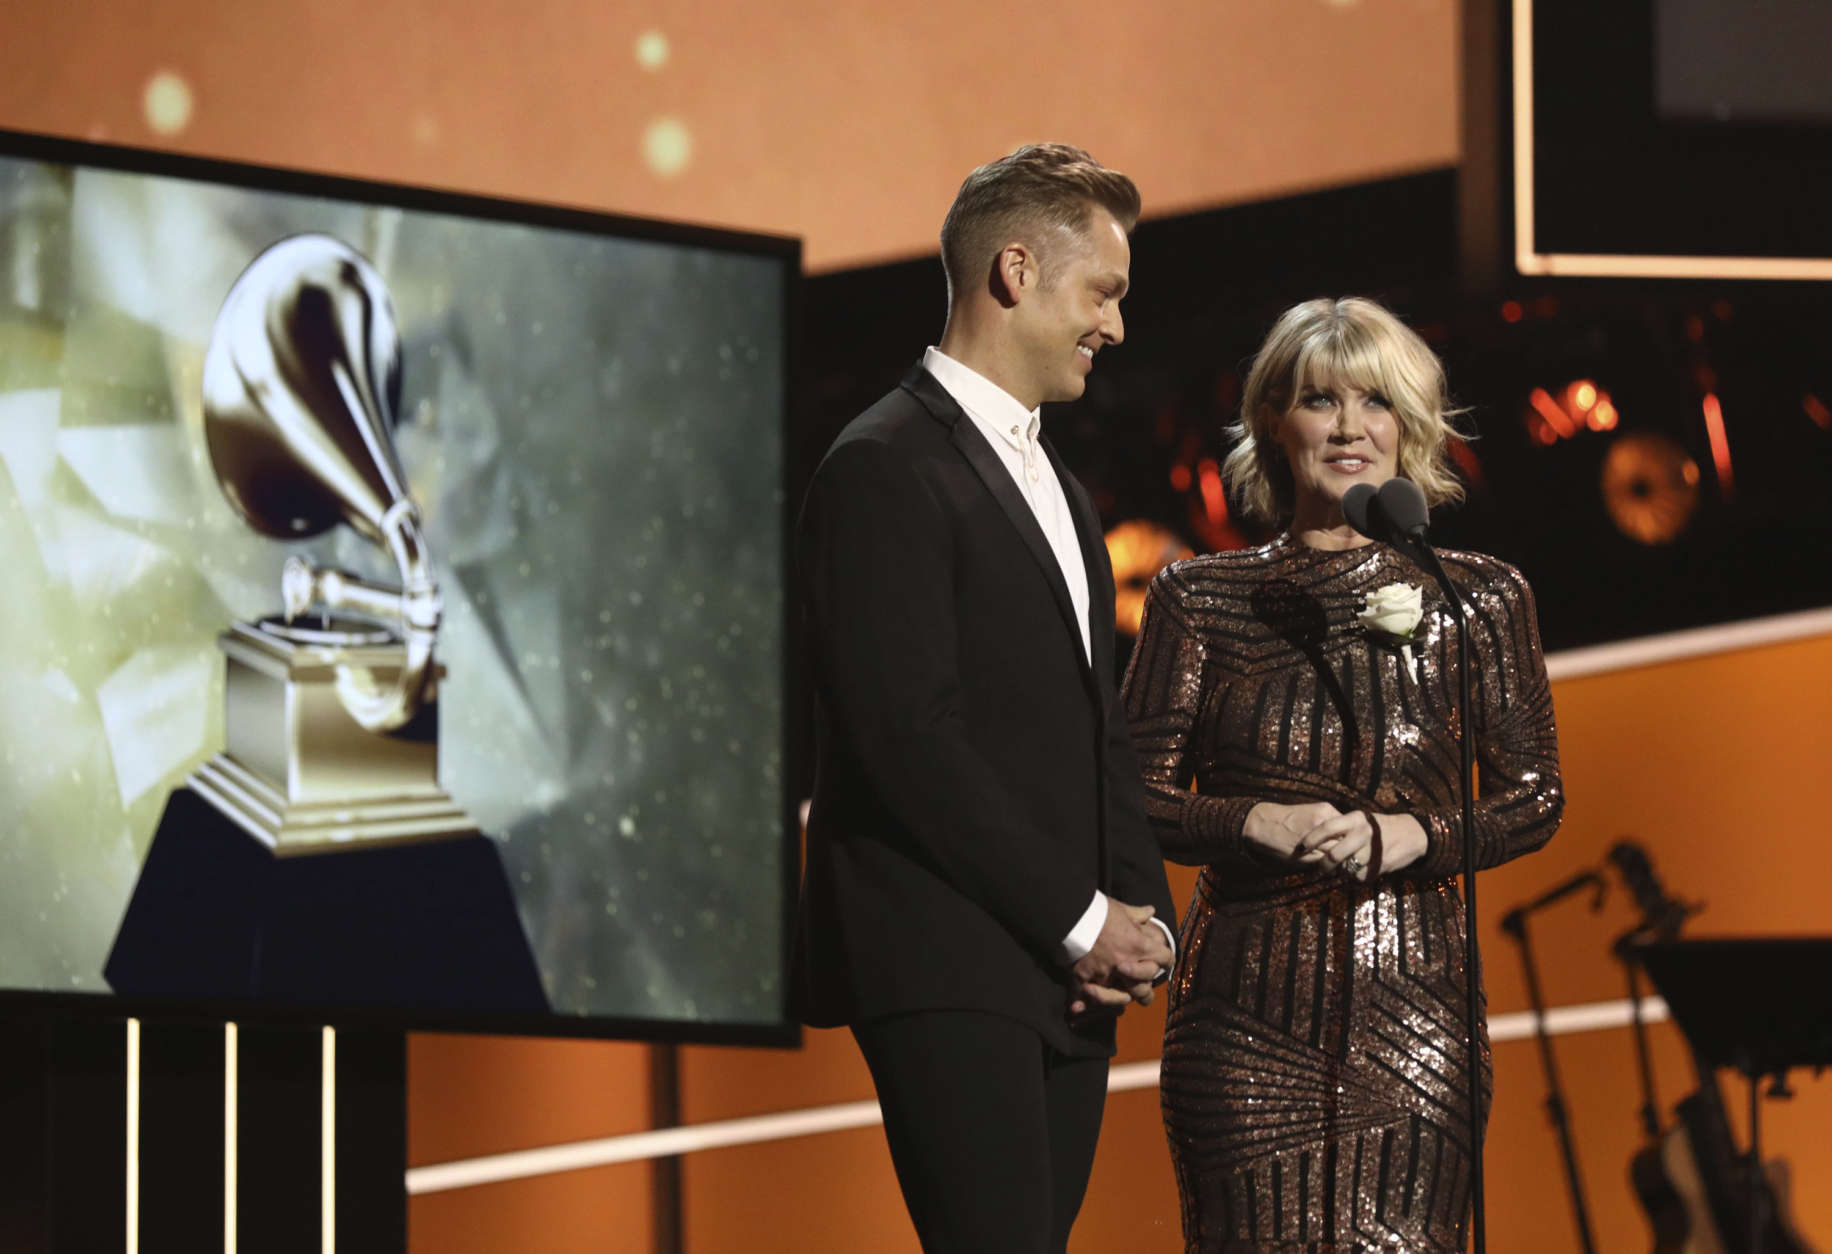 Bernie Herms, left, and Natalie Grant speak at the 60th annual Grammy Awards at Madison Square Garden on Sunday, Jan. 28, 2018, in New York. (Photo by Matt Sayles/Invision/AP)